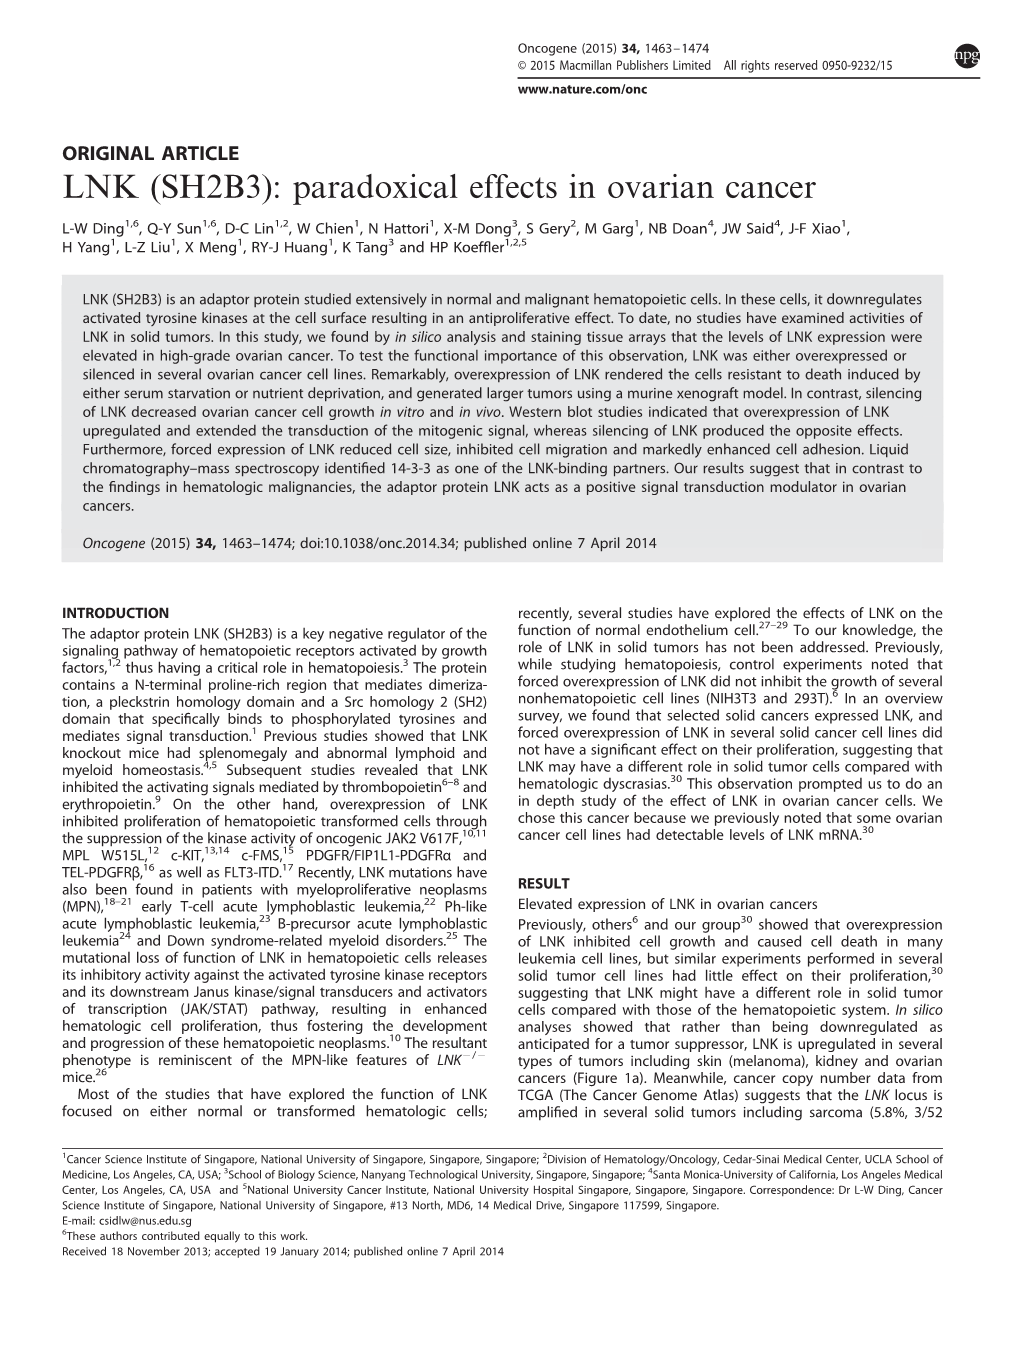 LNK (SH2B3): Paradoxical Effects in Ovarian Cancer